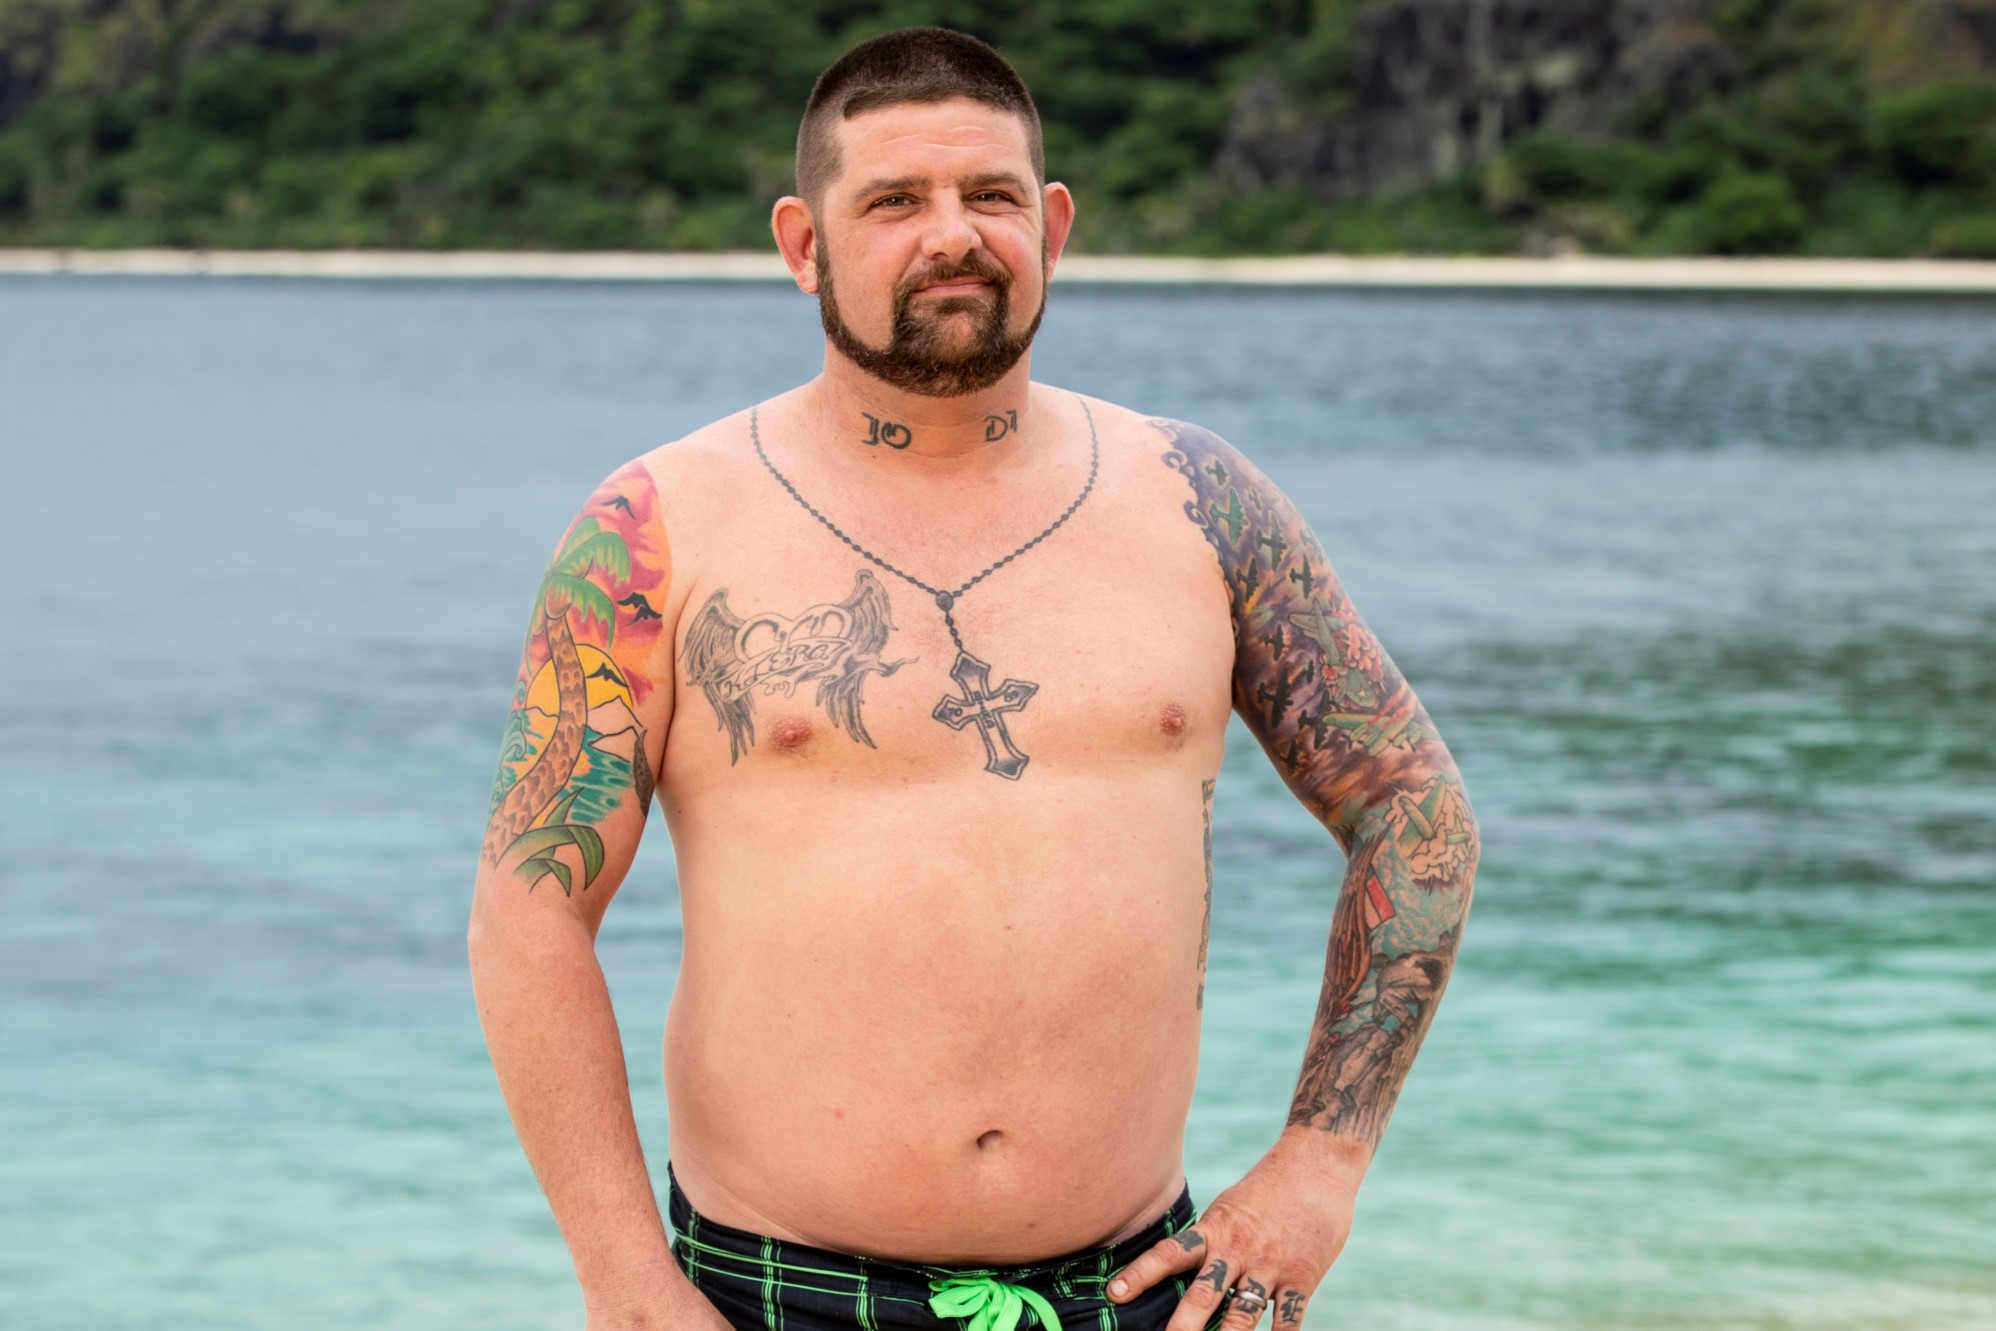 'Survivor' Season 37 contestant Pat Cusack poses shirtless on the beach, wearing green and black swim trunks. He has many tattoos on his arms and chest.